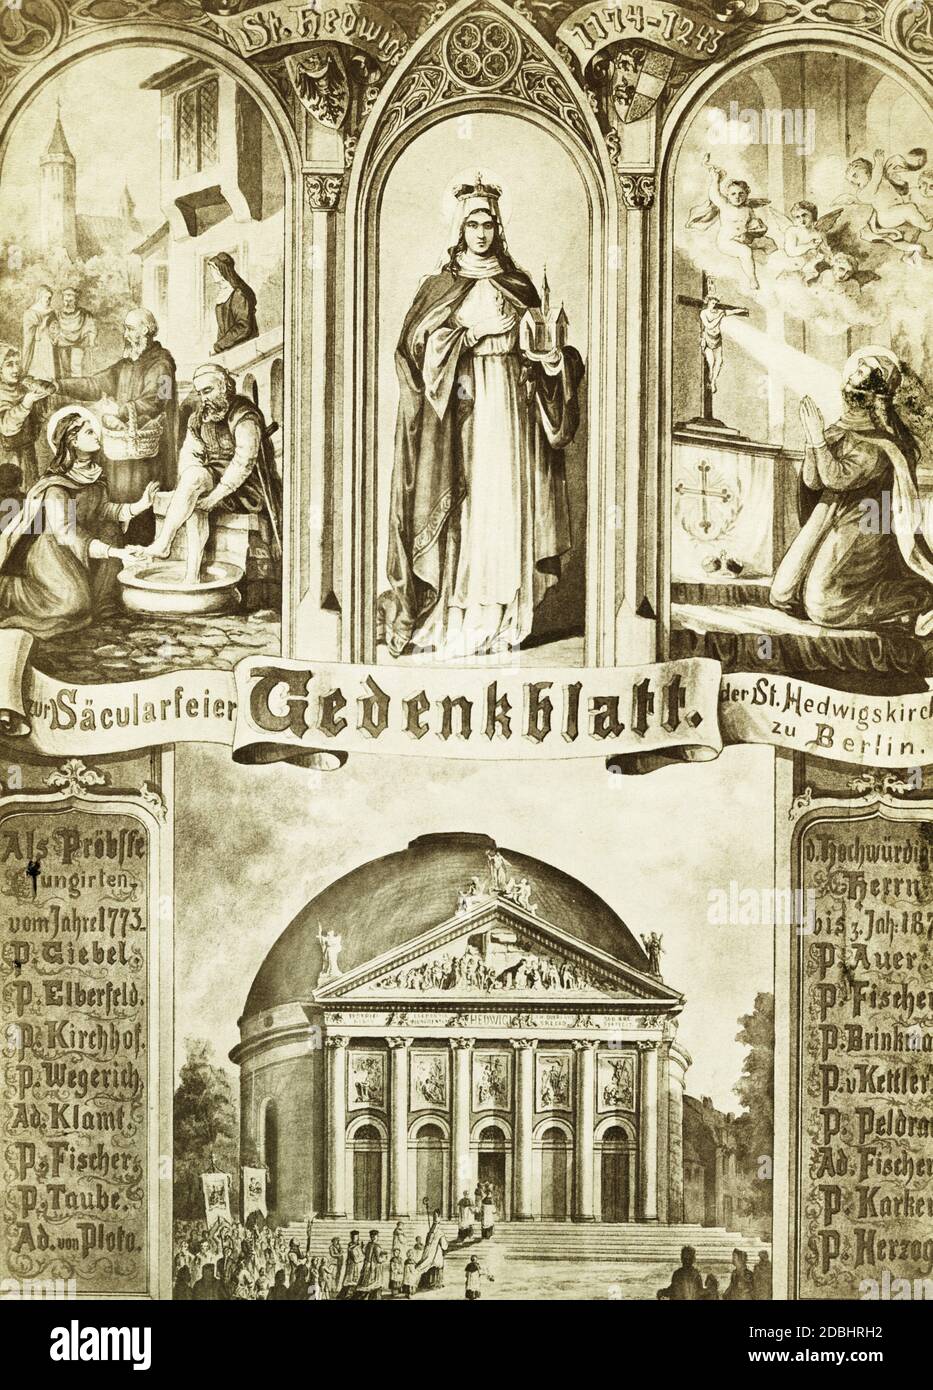 'The photo shows the ''Gedenkblatt zur Saecularfeier der St. Hedwigskirche zu Berlin'' with a painting of the patroness Hedwig. The St. Hedwig's Cathedral on Bebelplatz in Berlin-Mitte was consecrated in 1773 and the parish celebrated its hundredth anniversary in 1873.' Stock Photo